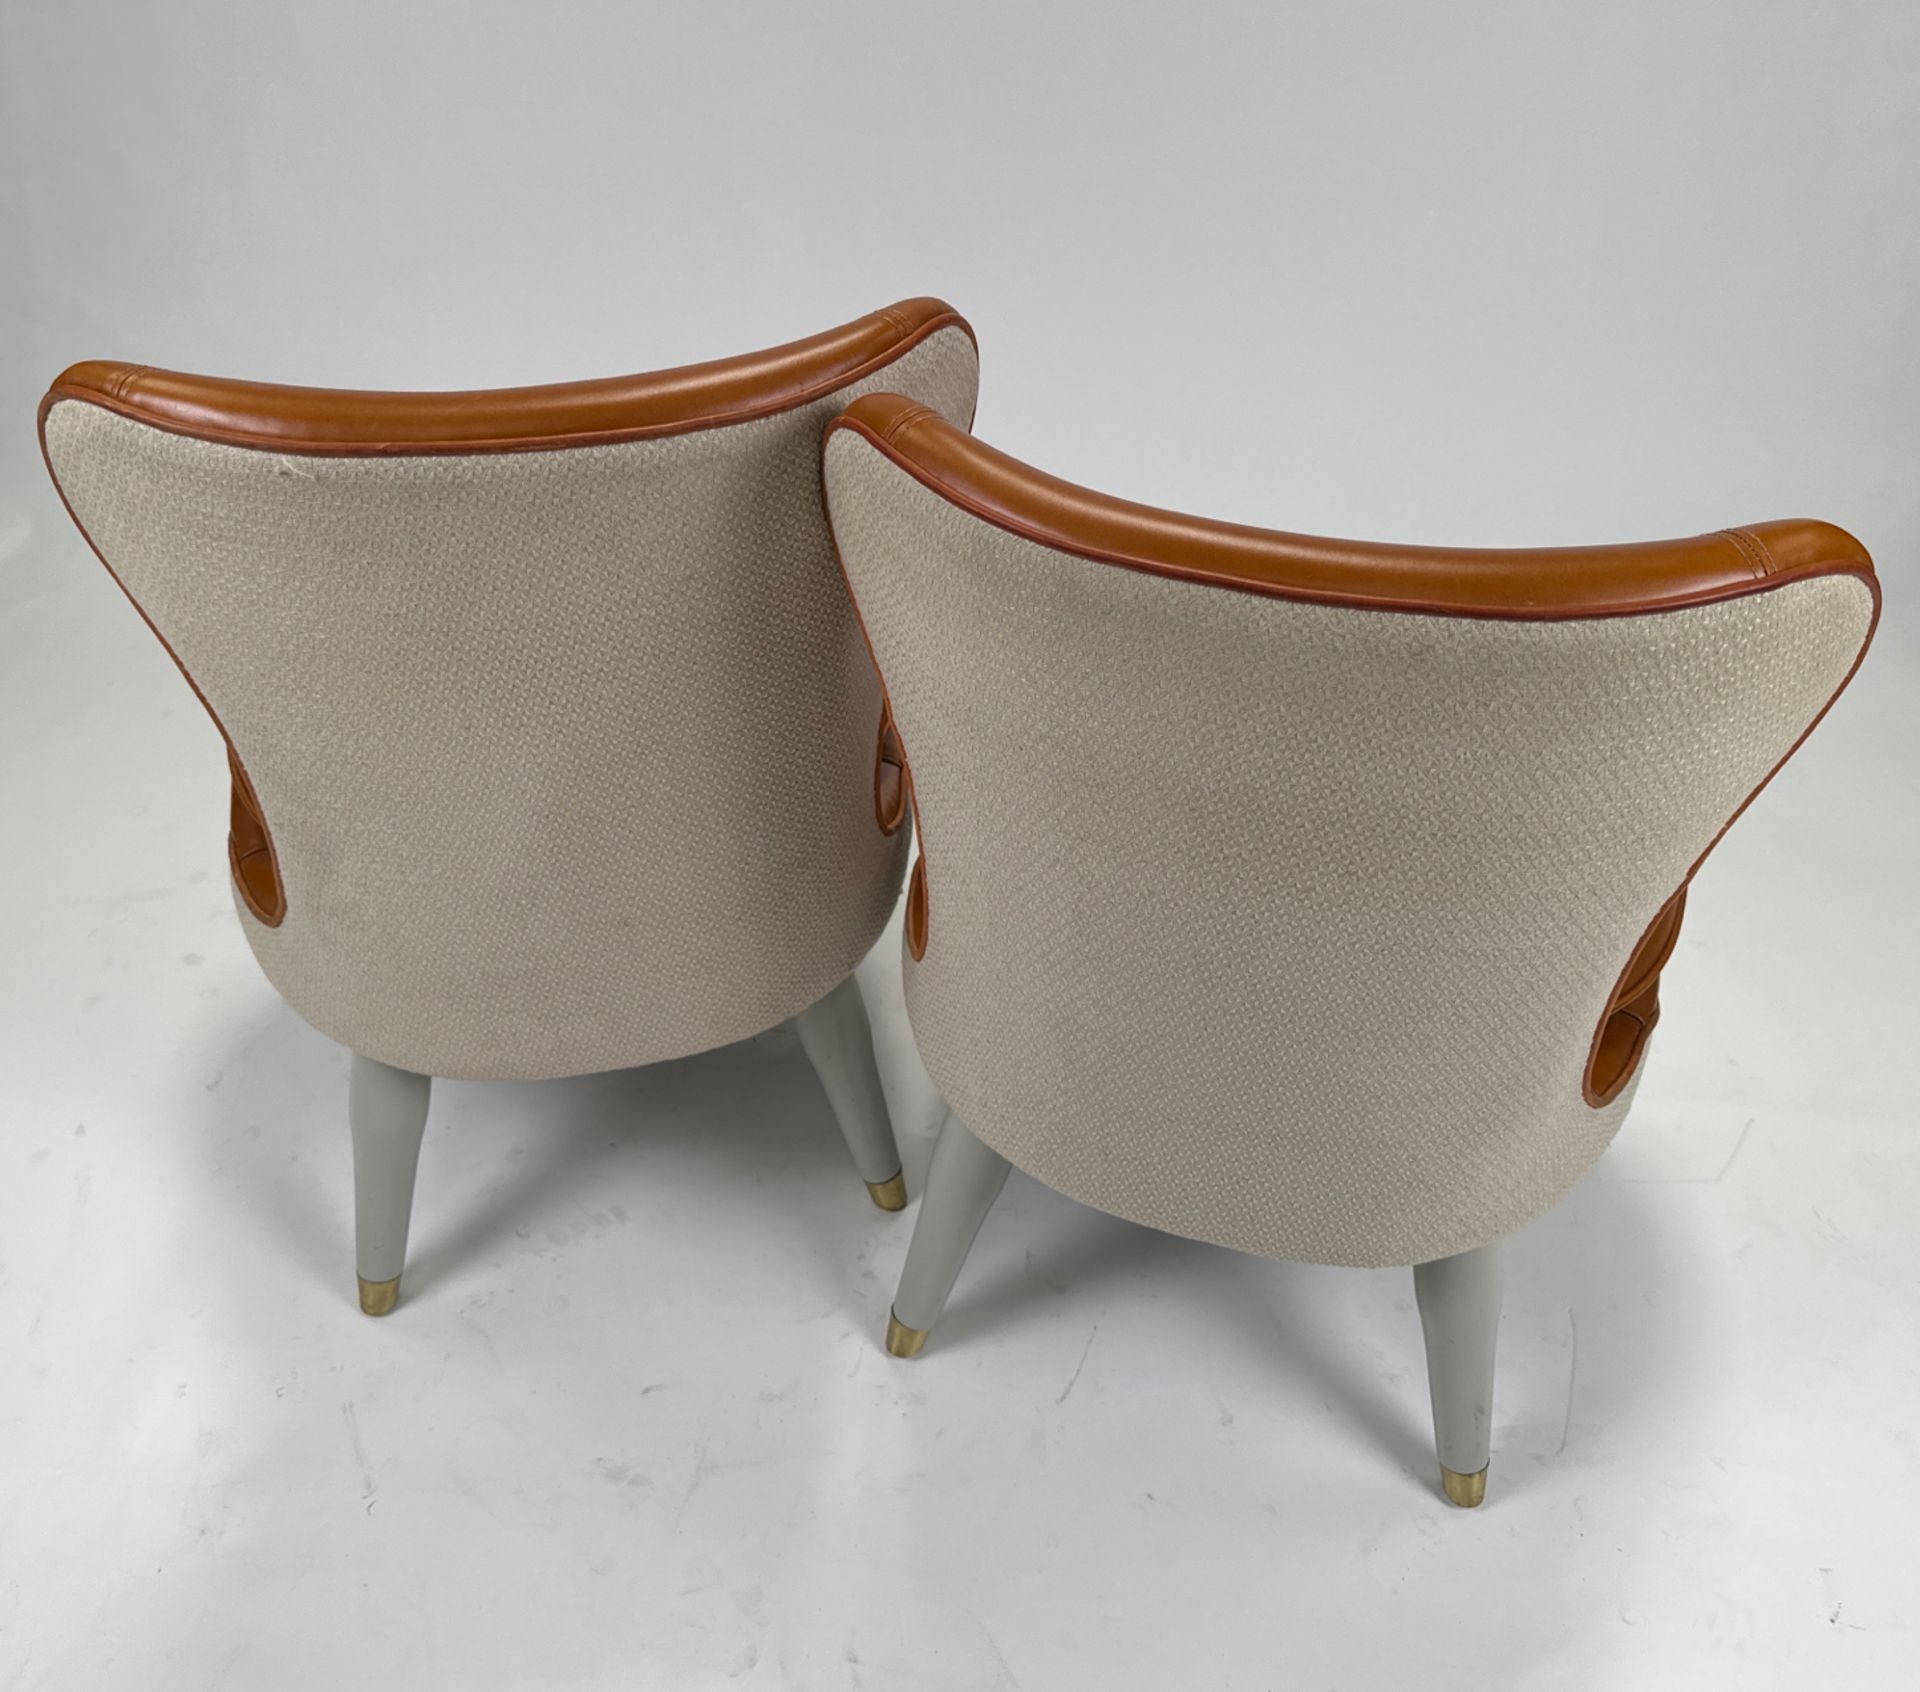 Pair of Ben Whistler Chairs Commissioned by Robert Angell Designed for The Berkeley - Image 4 of 5